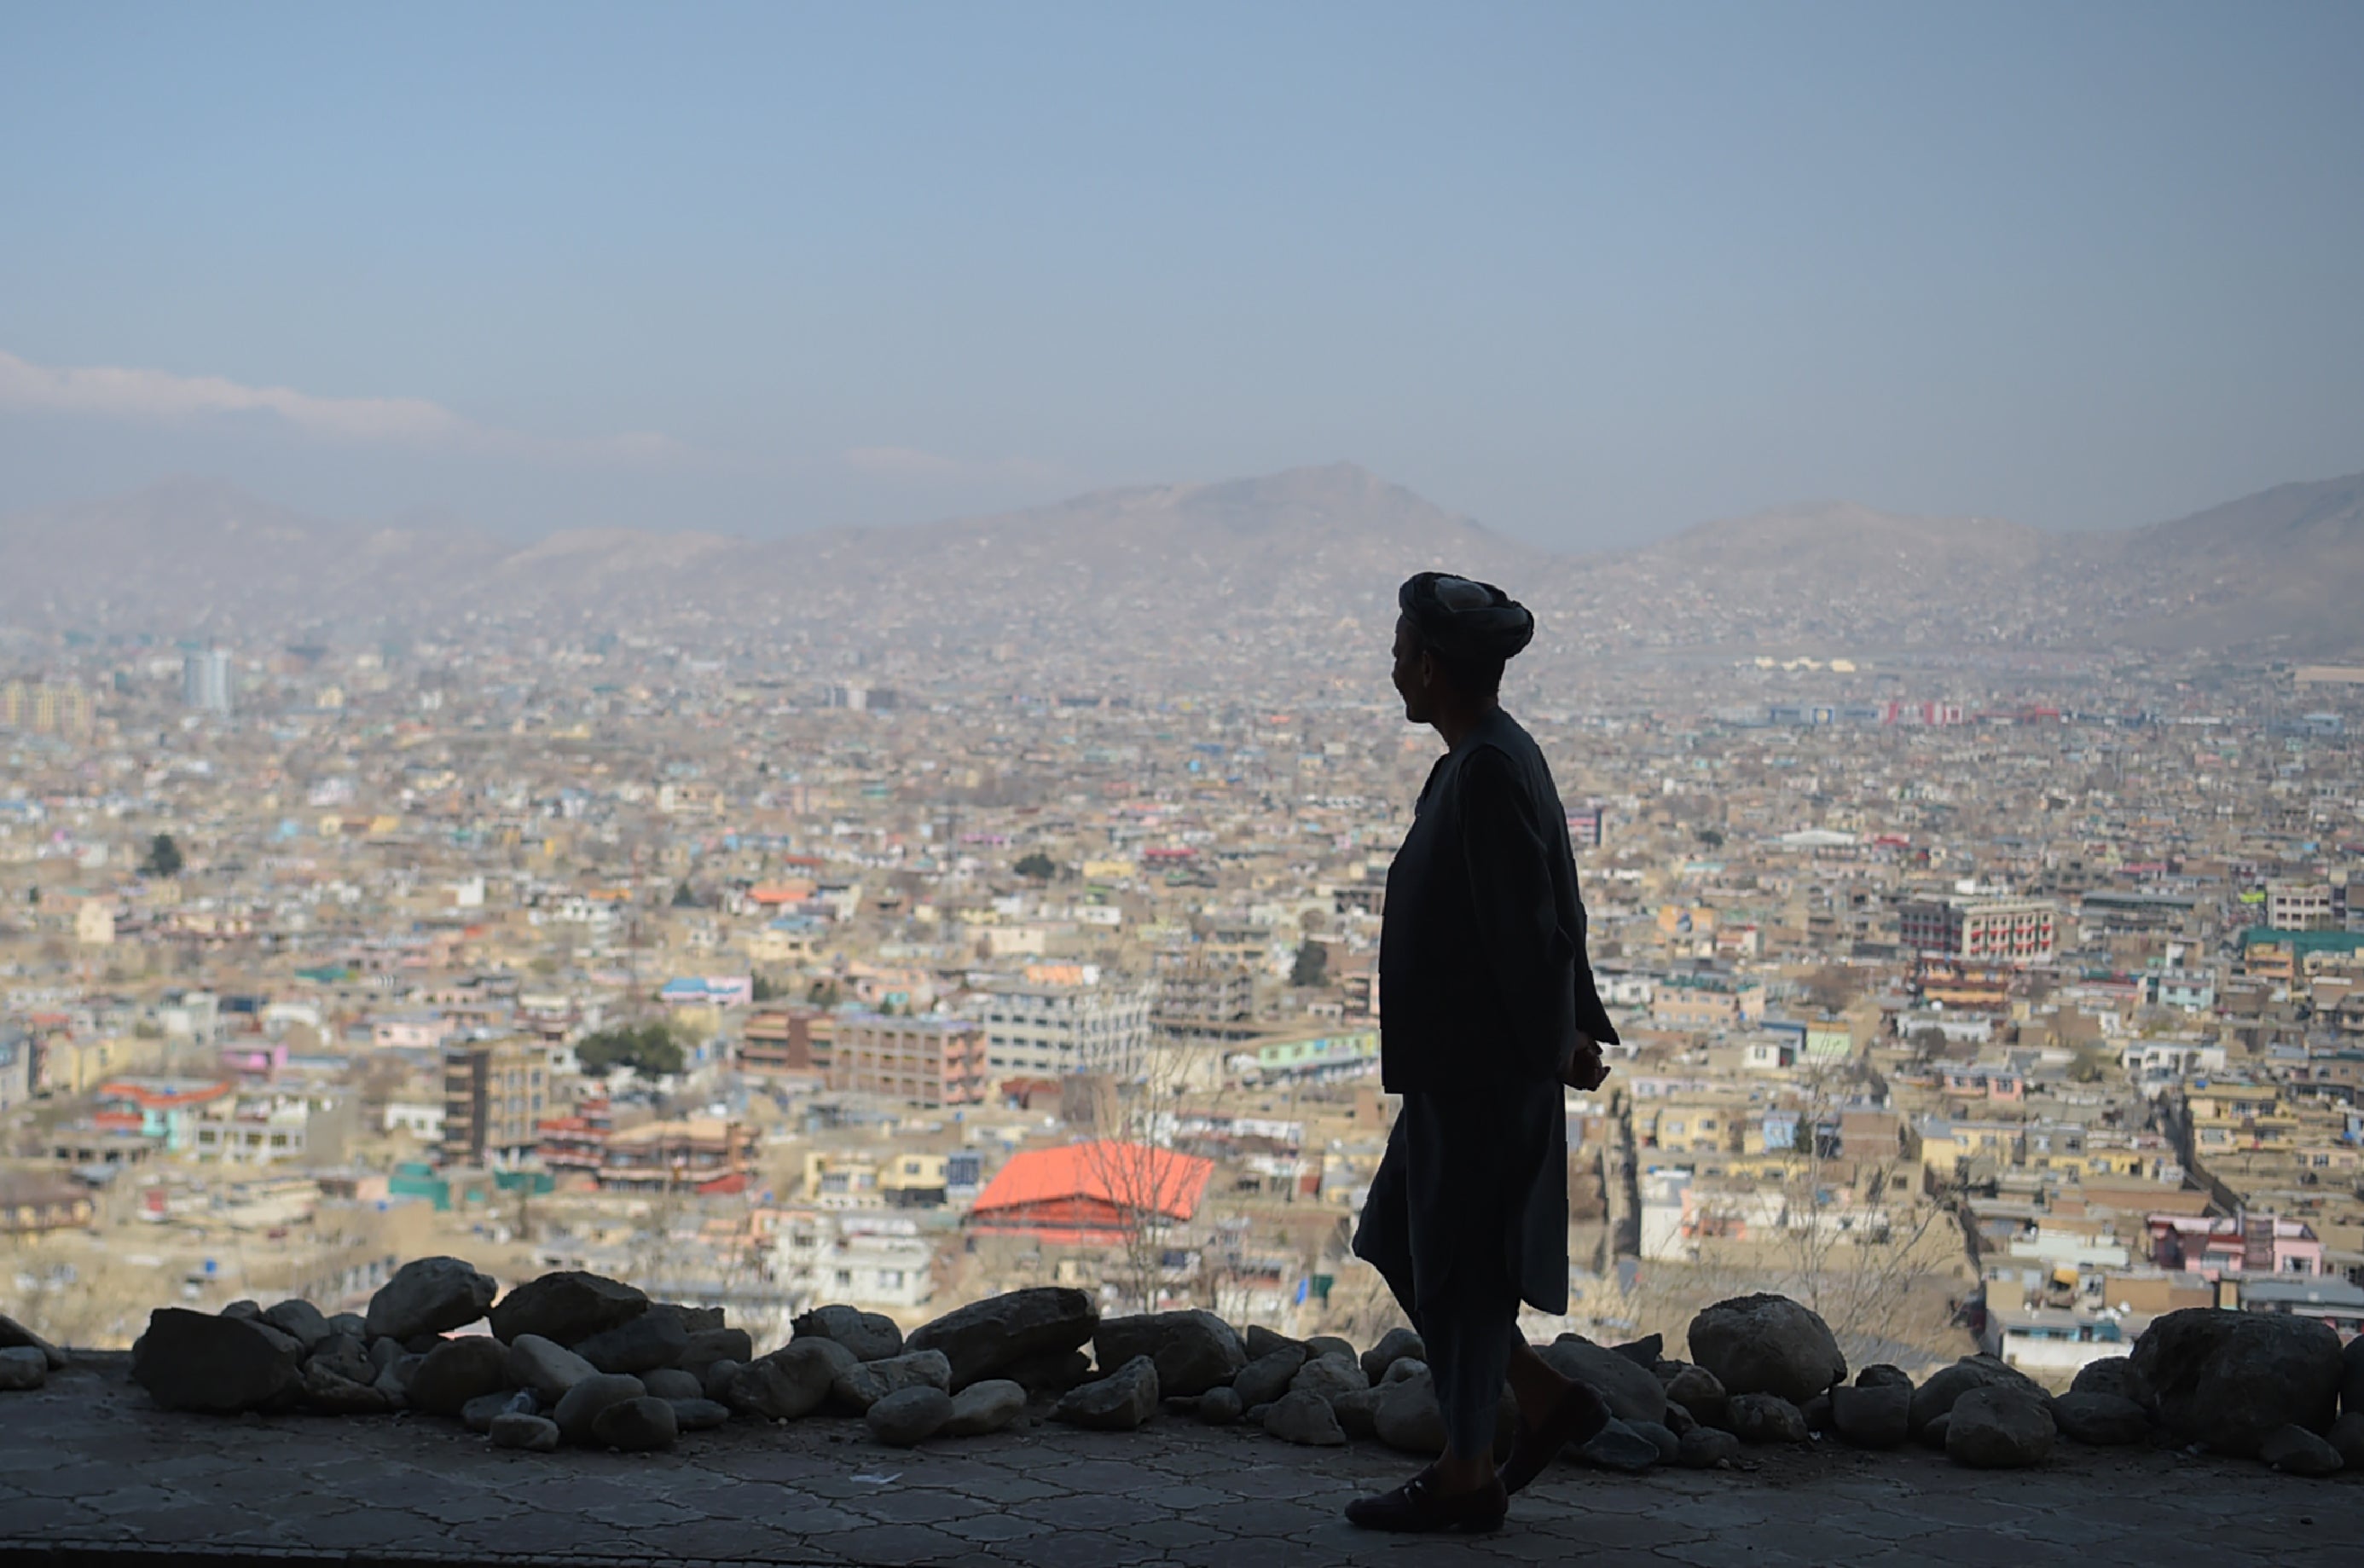 Some in Kabul are edgy about the impending departure of international troops